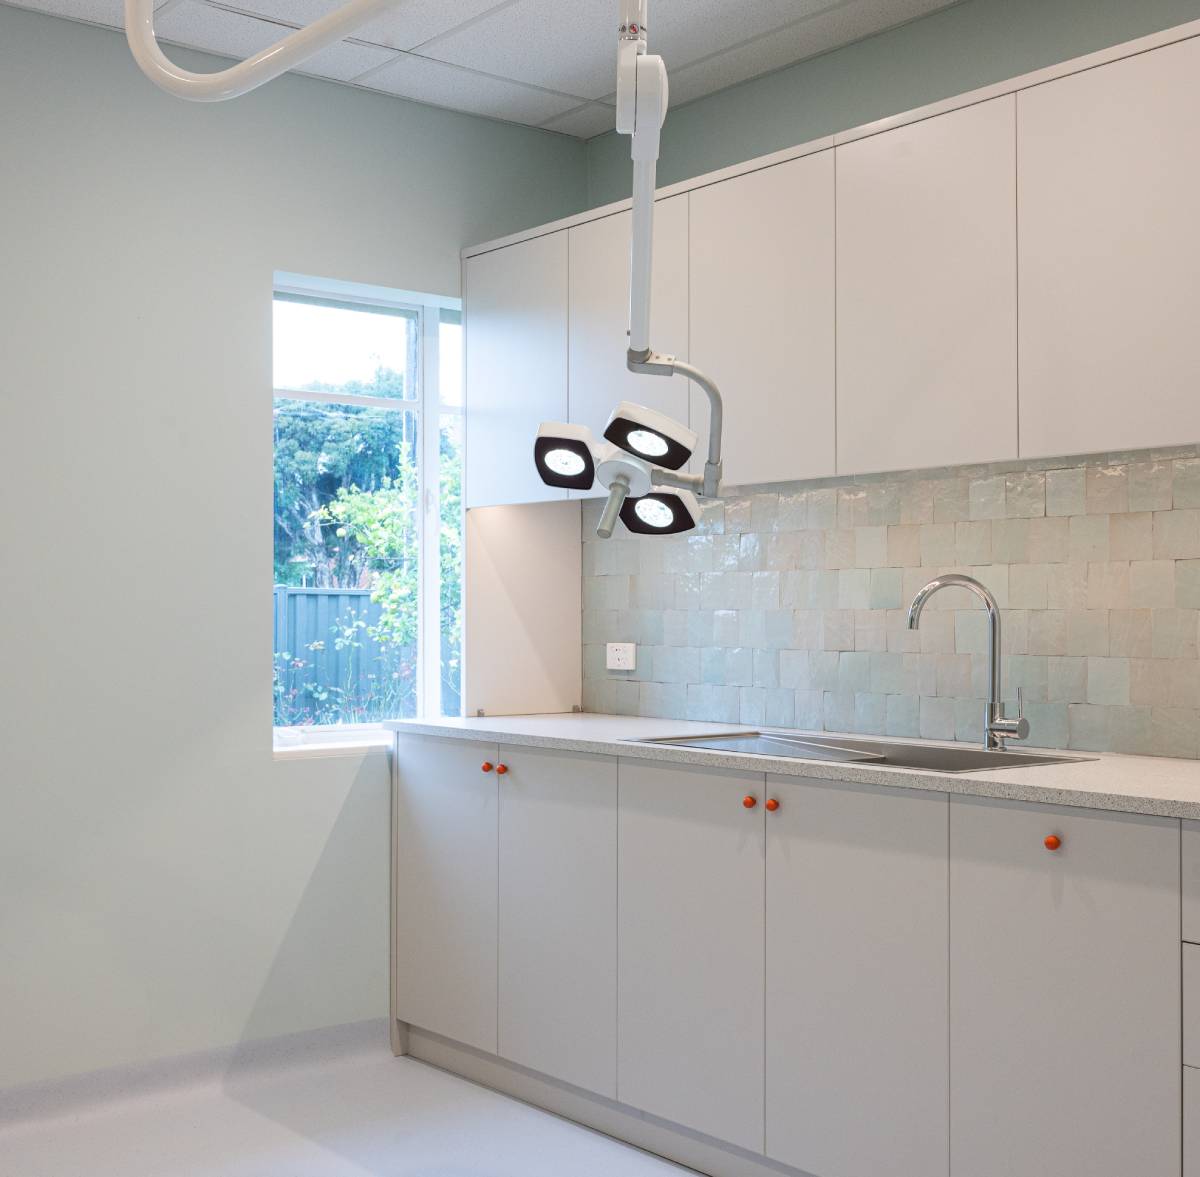 Featured image for “Residential to Medical Clinic”